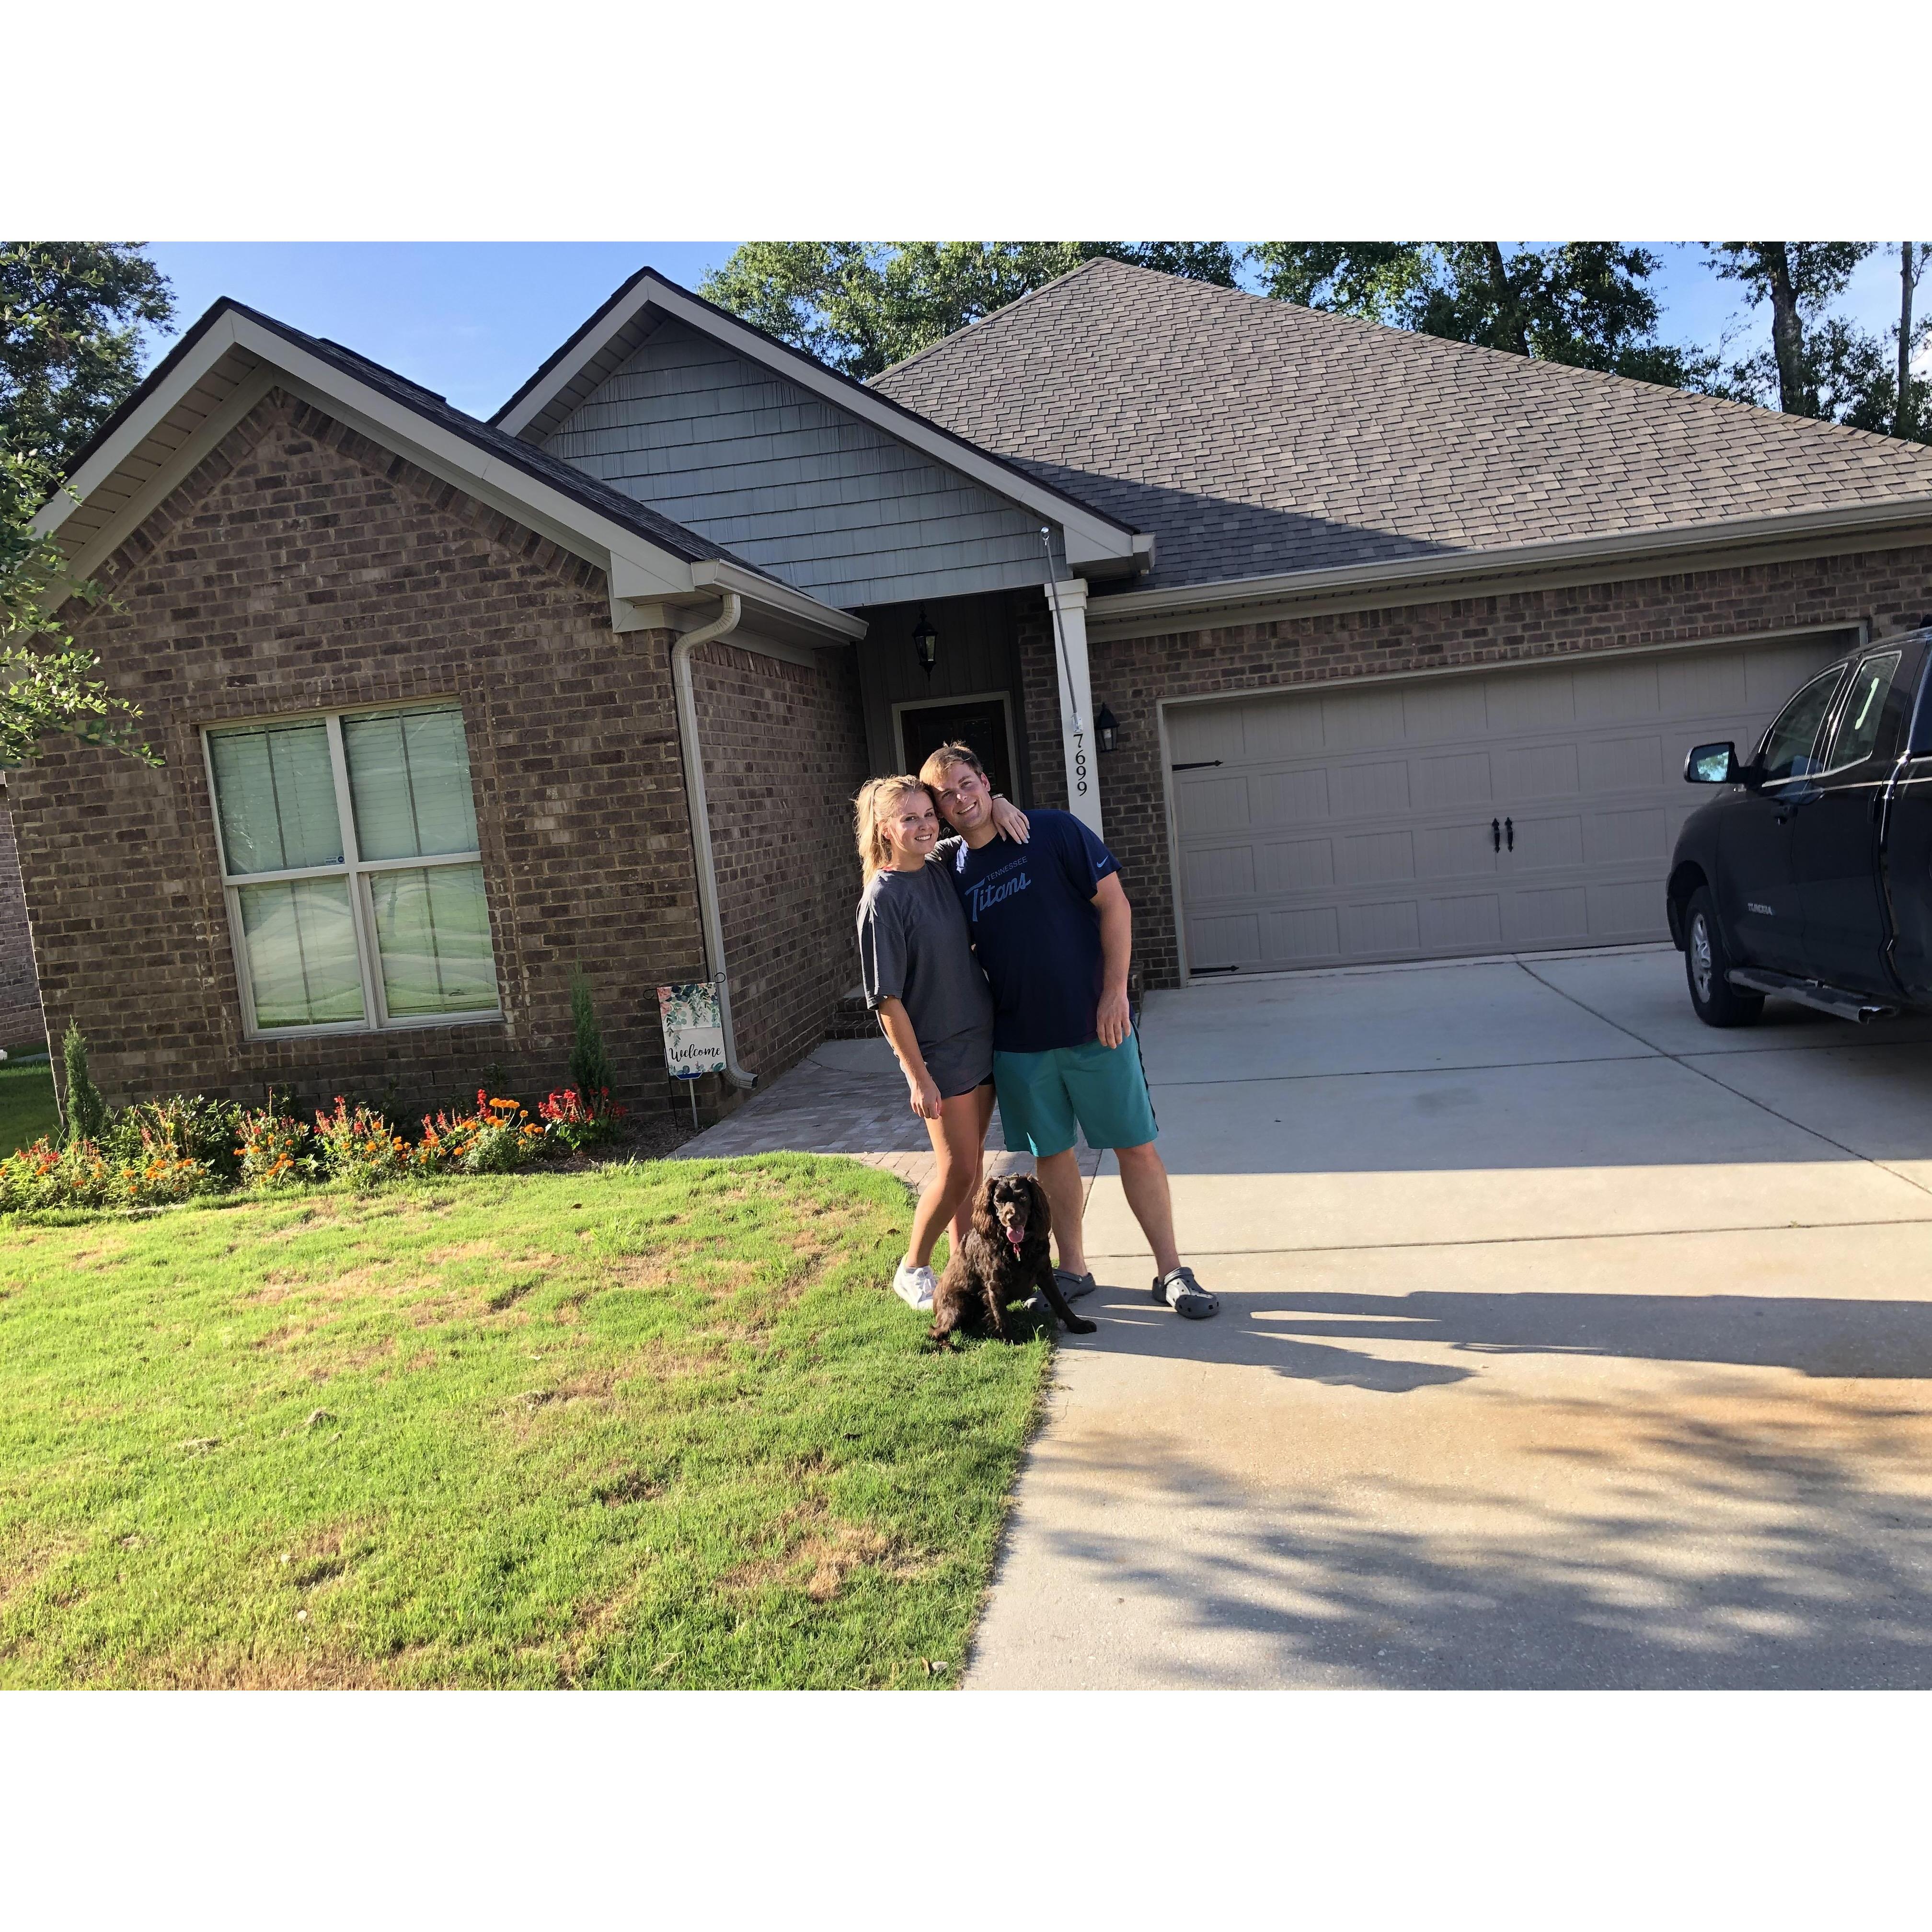 Family photo after we bought our first home! 6/28/20